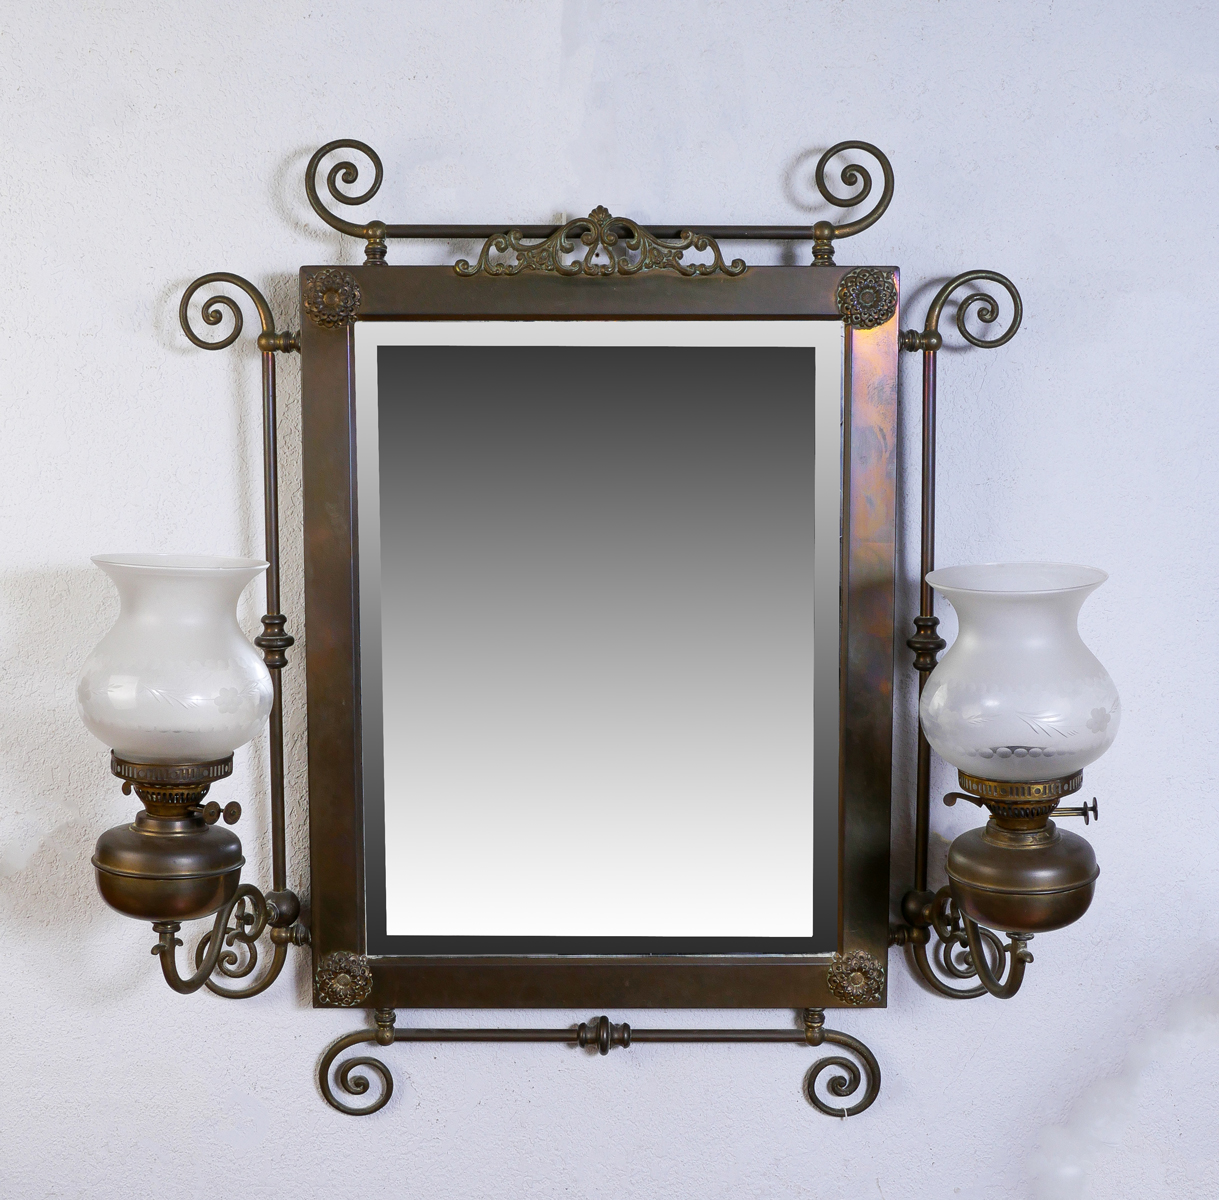 BRASS WALL MIRROR WITH SCONCES: